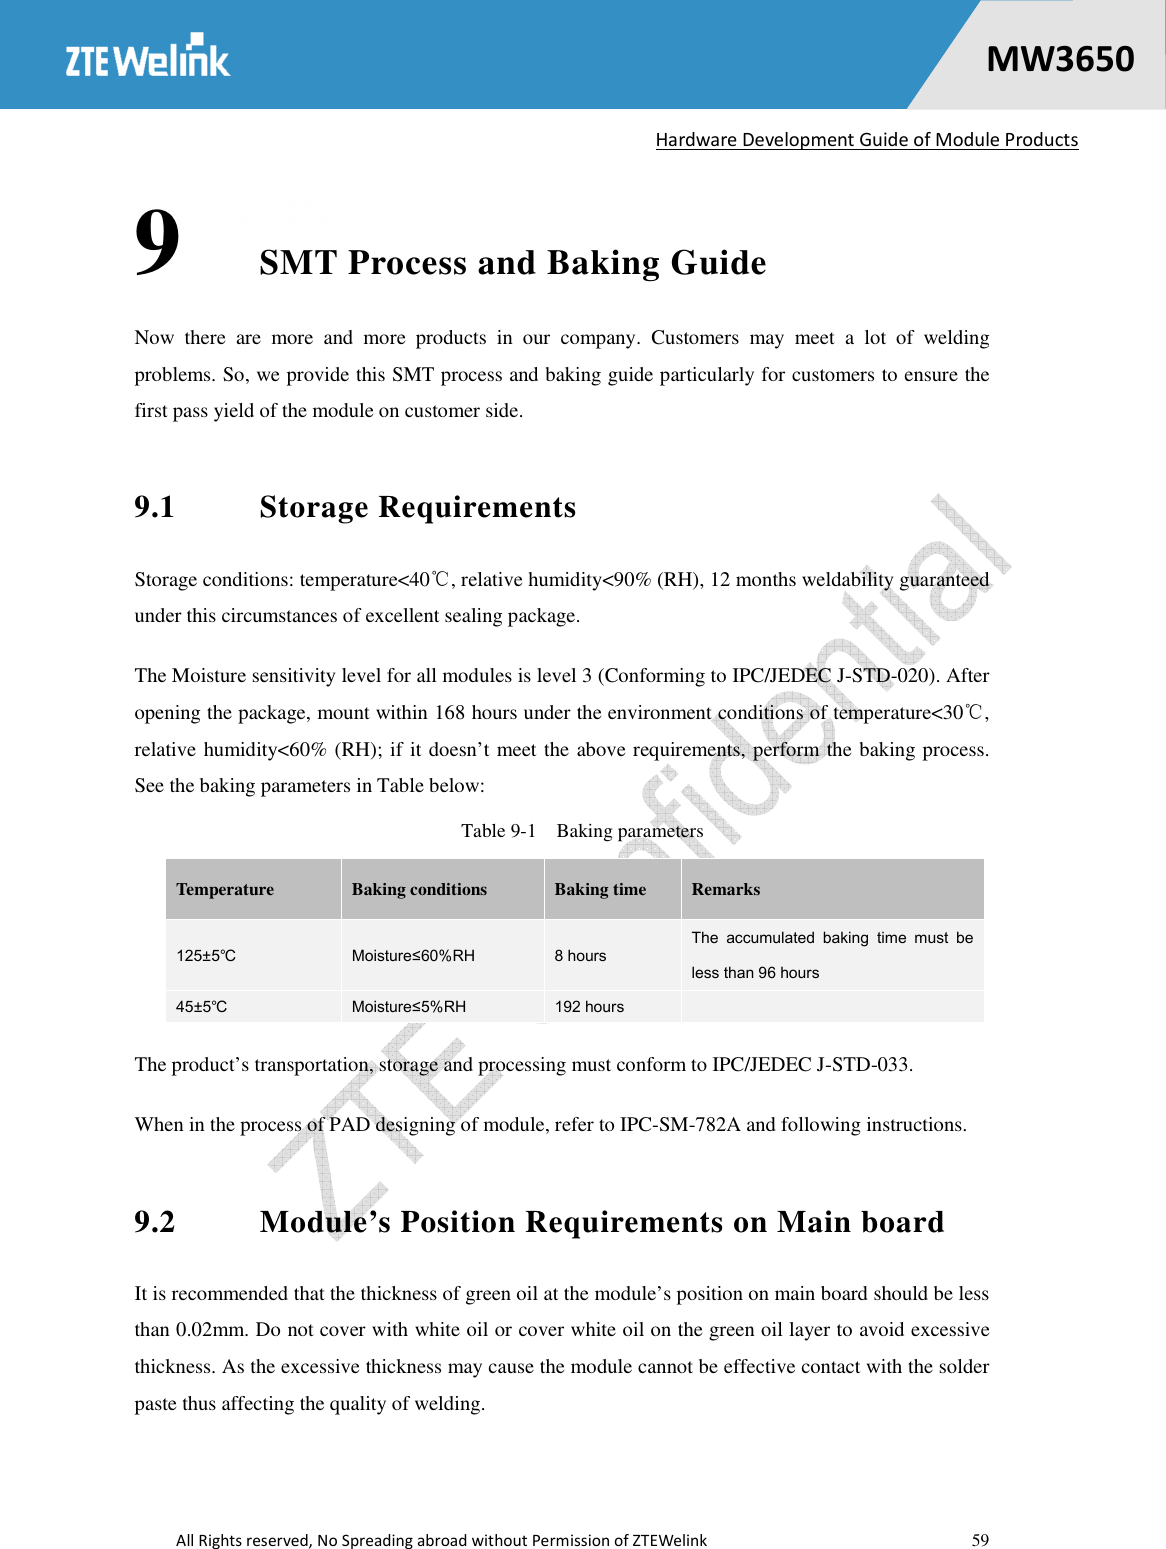   Hardware Development Guide of Module Products  All Rights reserved, No Spreading abroad without Permission of ZTEWelink    59    MW36500 9 SMT Process and Baking Guide Now  there  are  more  and  more  products  in  our  company.  Customers  may  meet  a  lot  of  welding problems. So, we provide this SMT process and baking guide particularly for customers to ensure the first pass yield of the module on customer side. 9.1  Storage Requirements Storage conditions: temperature&lt;40℃, relative humidity&lt;90% (RH), 12 months weldability guaranteed under this circumstances of excellent sealing package. The Moisture sensitivity level for all modules is level 3 (Conforming to IPC/JEDEC J-STD-020). After opening the package, mount within 168 hours under the environment conditions of temperature&lt;30℃, relative humidity&lt;60% (RH); if it doesn’t meet the above requirements, perform the baking process. See the baking parameters in Table below: Table 9-1    Baking parameters Temperature  Baking conditions  Baking time  Remarks 125±5℃  Moisture≤60%RH  8 hours The  accumulated  baking  time  must  be less than 96 hours   45±5℃  Moisture≤5%RH  192 hours   The product’s transportation, storage and processing must conform to IPC/JEDEC J-STD-033. When in the process of PAD designing of module, refer to IPC-SM-782A and following instructions. 9.2  Module’s Position Requirements on Main board It is recommended that the thickness of green oil at the module’s position on main board should be less than 0.02mm. Do not cover with white oil or cover white oil on the green oil layer to avoid excessive thickness. As the excessive thickness may cause the module cannot be effective contact with the solder paste thus affecting the quality of welding. 